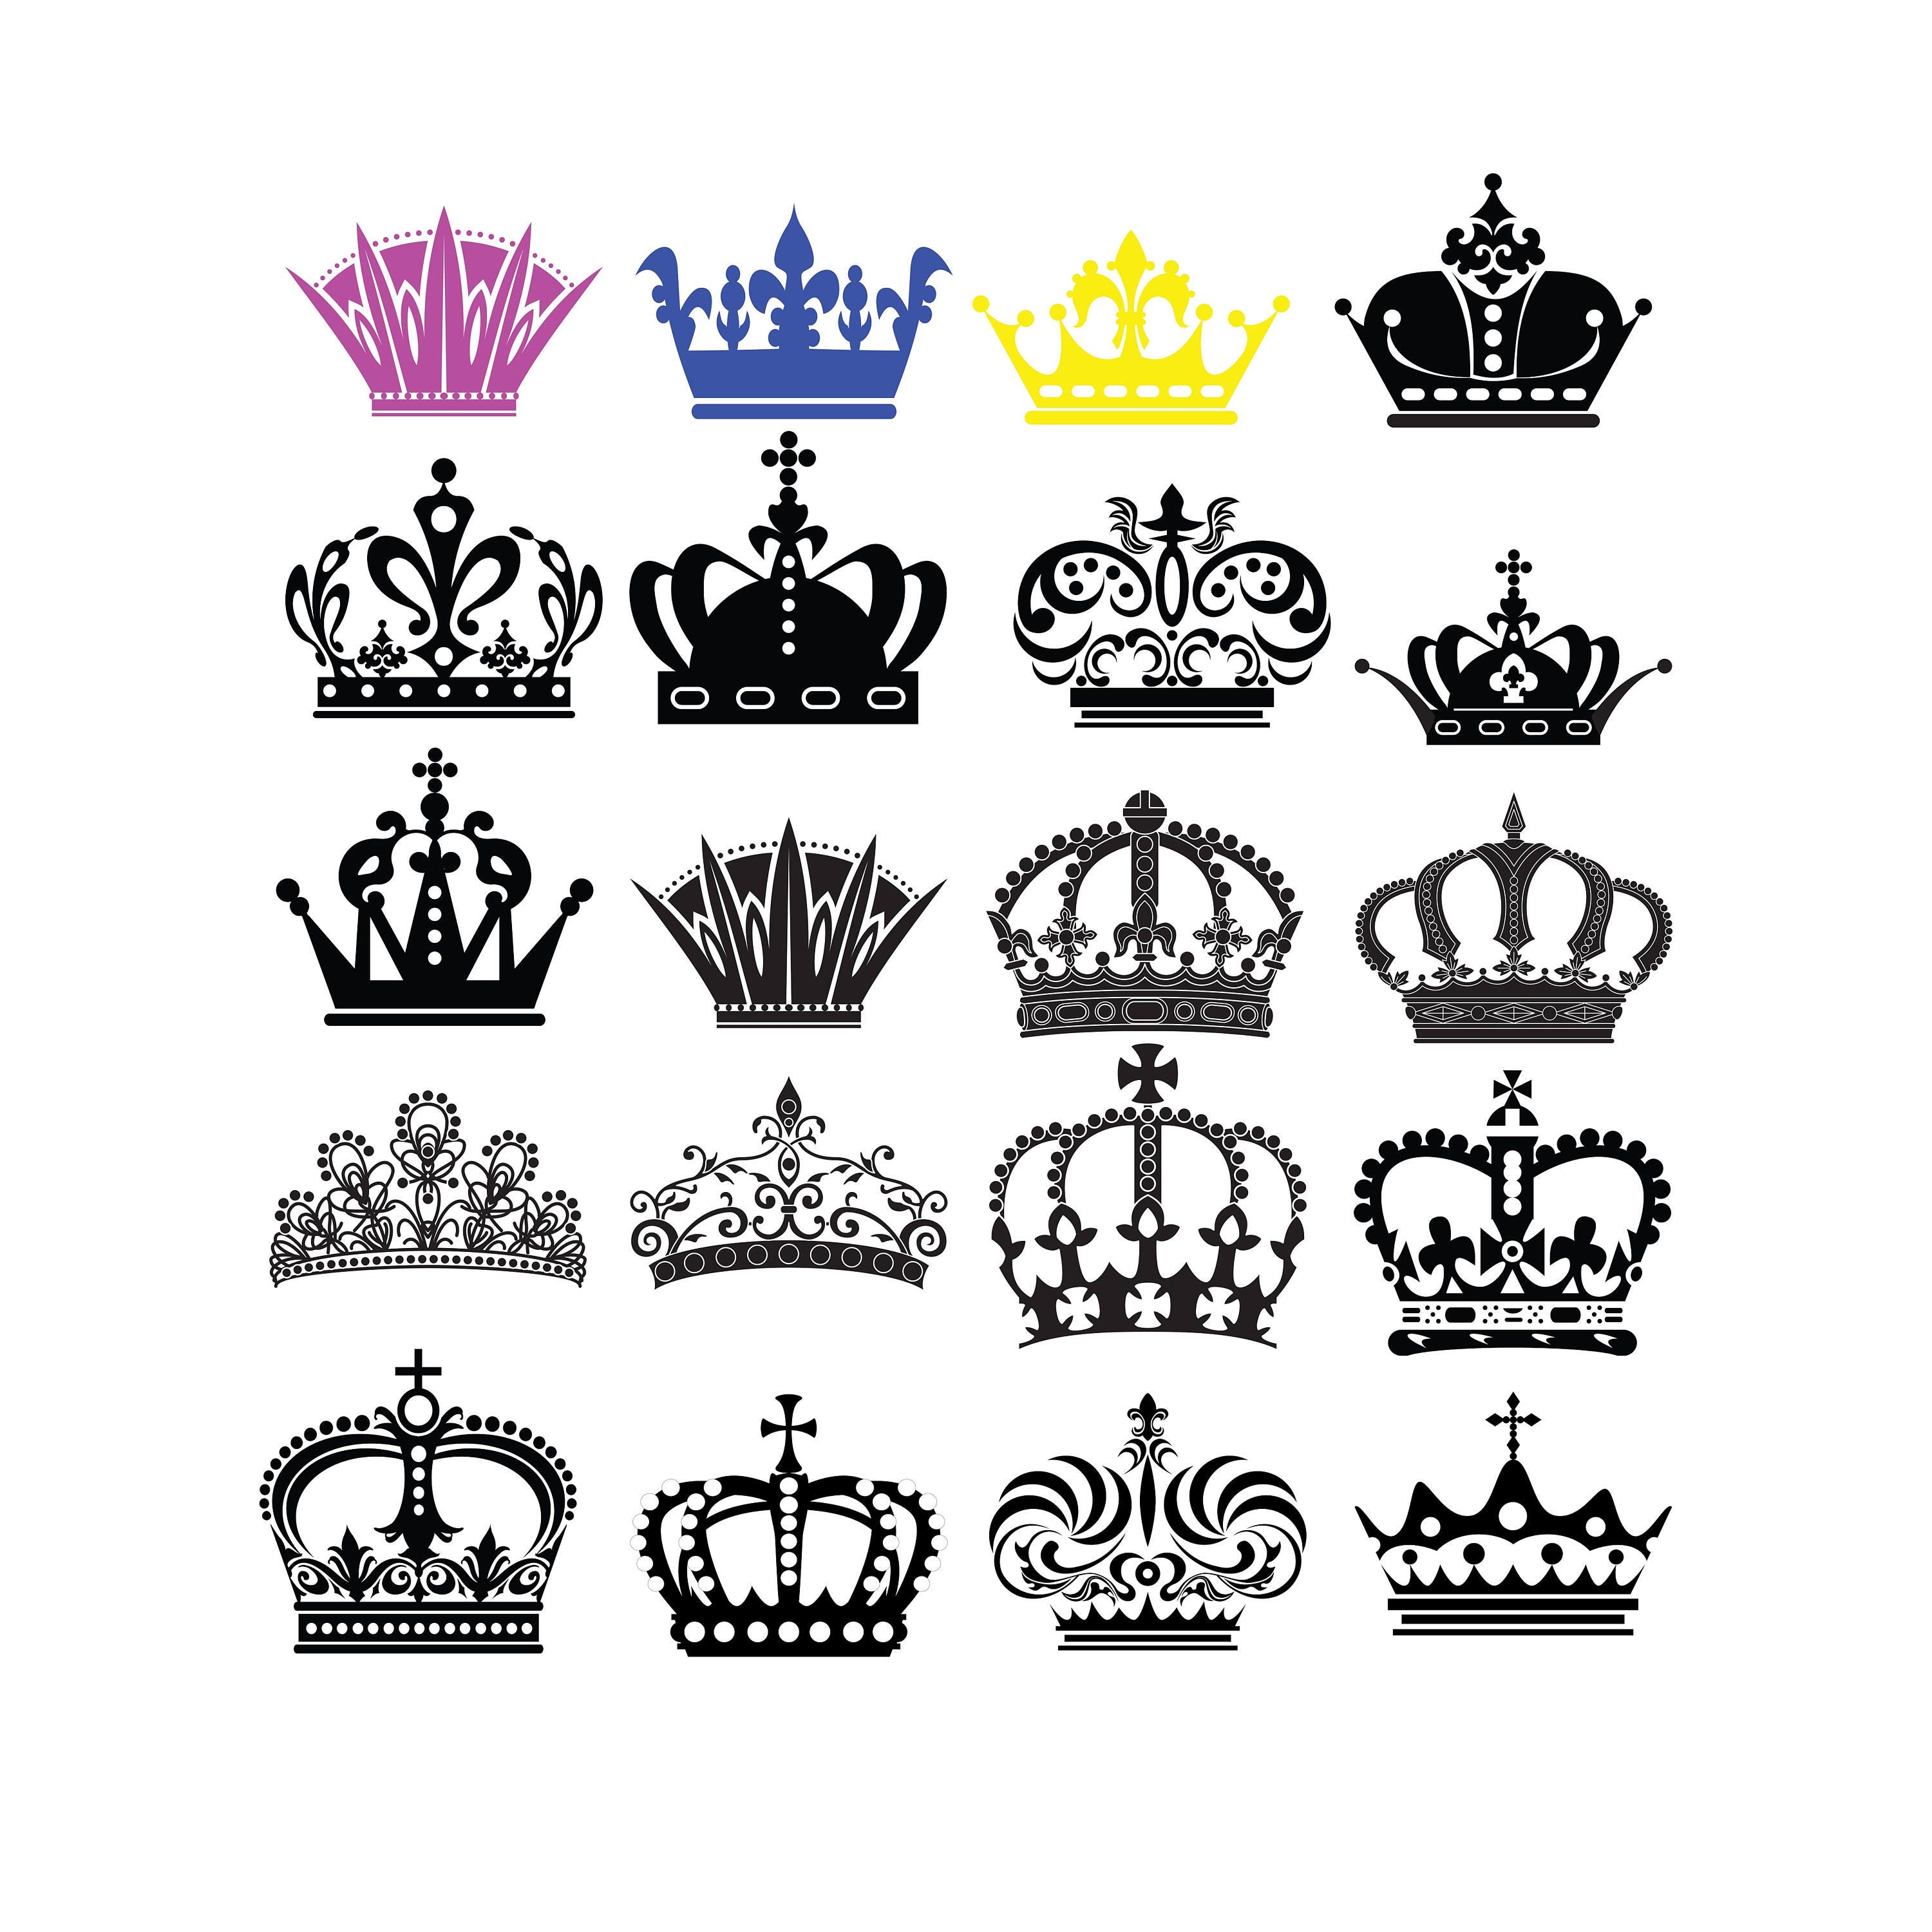 Download 20 Crown svgpngjpgeps for Print/Silhouette Cameo/Cricut and